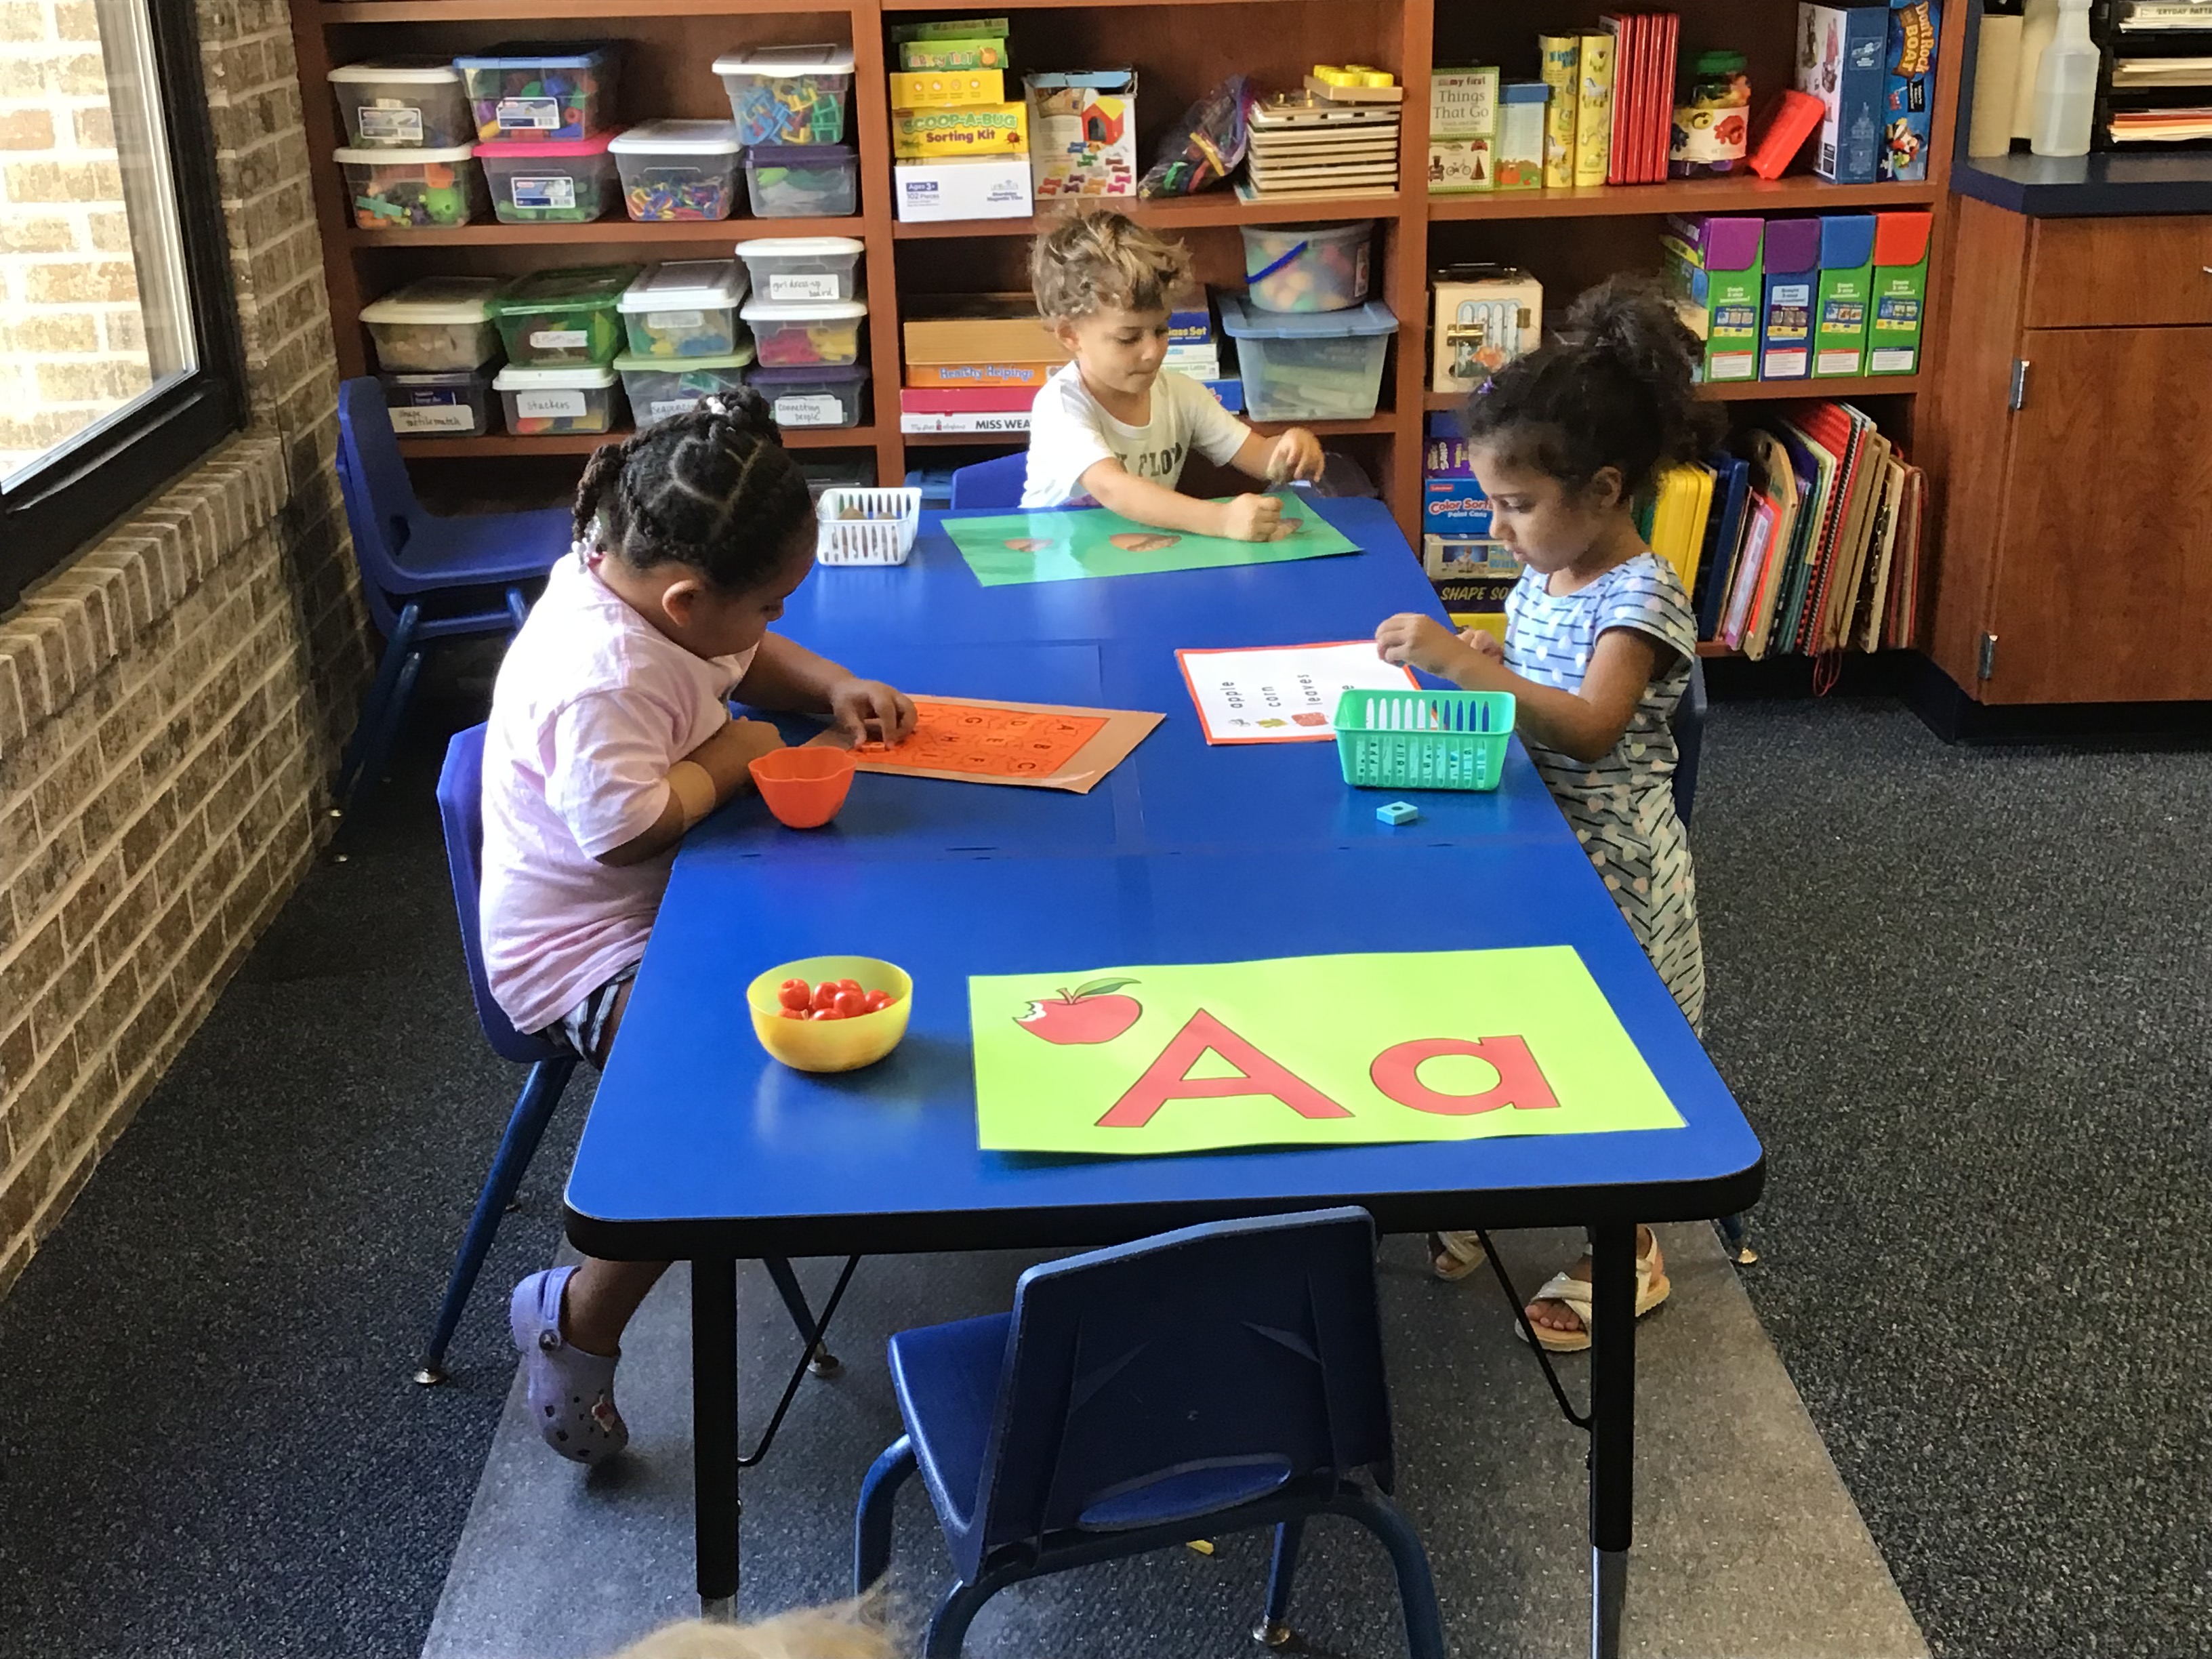 Friends playing at literacy table